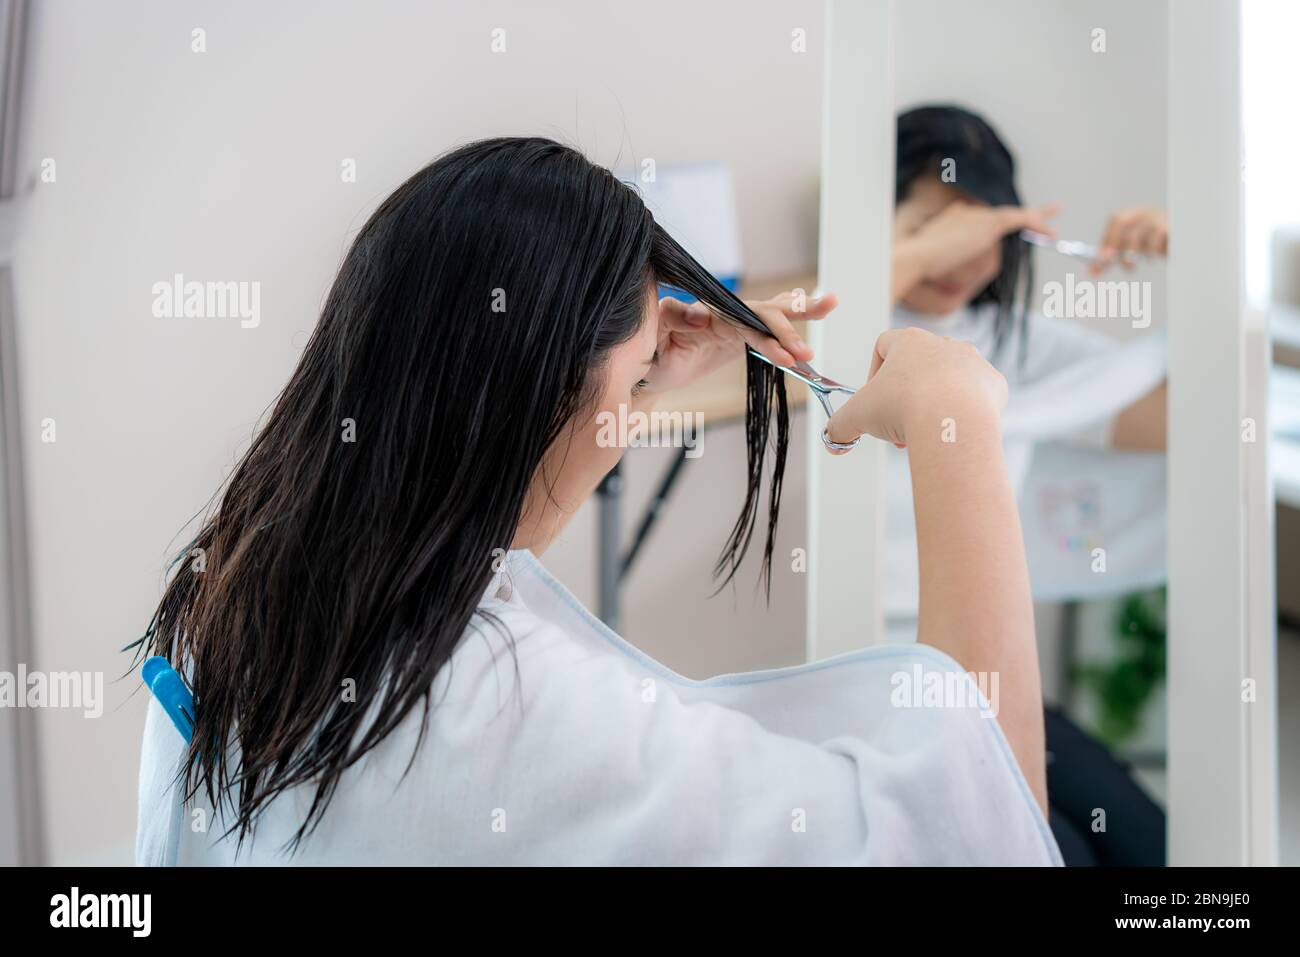 Asian woman cutting own her hair with haircutting scissors at home they stay at home and shelter In place during time of home isolation against Novel Stock Photo